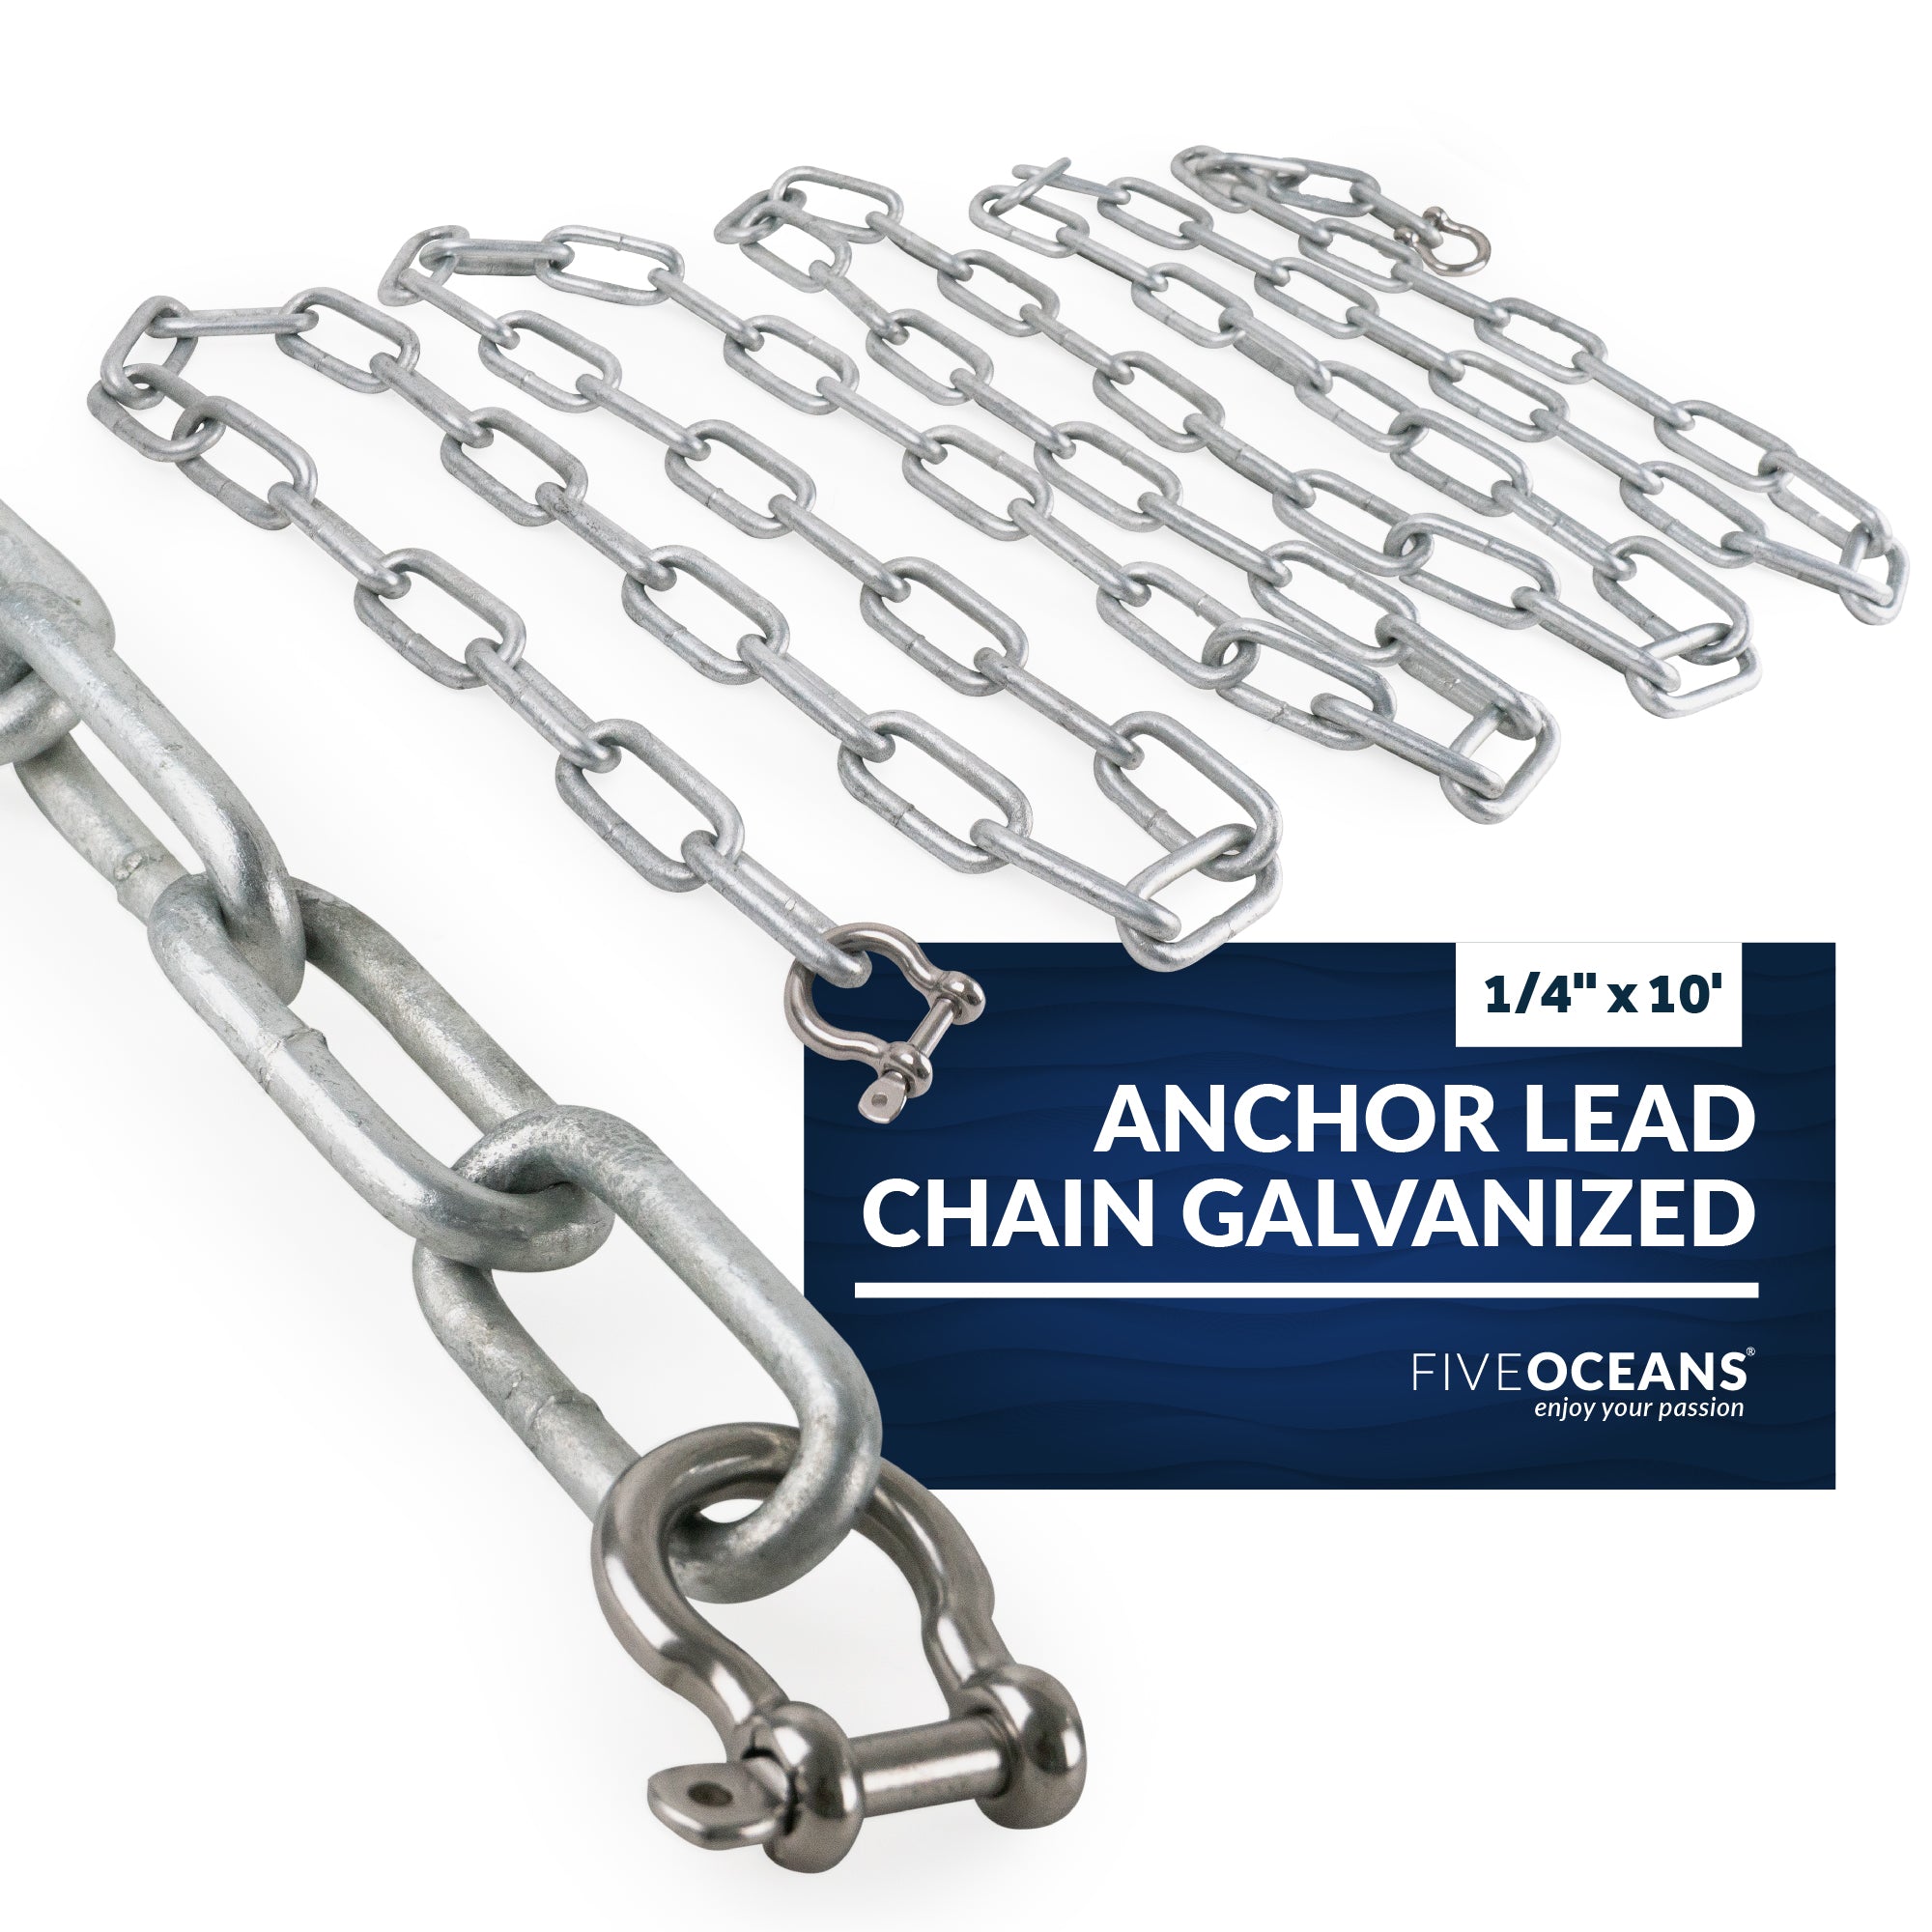 Anchor Lead Chain 1/4" x 10' Hot-Dipped Galvanized with Shackles - FO4568-GN10